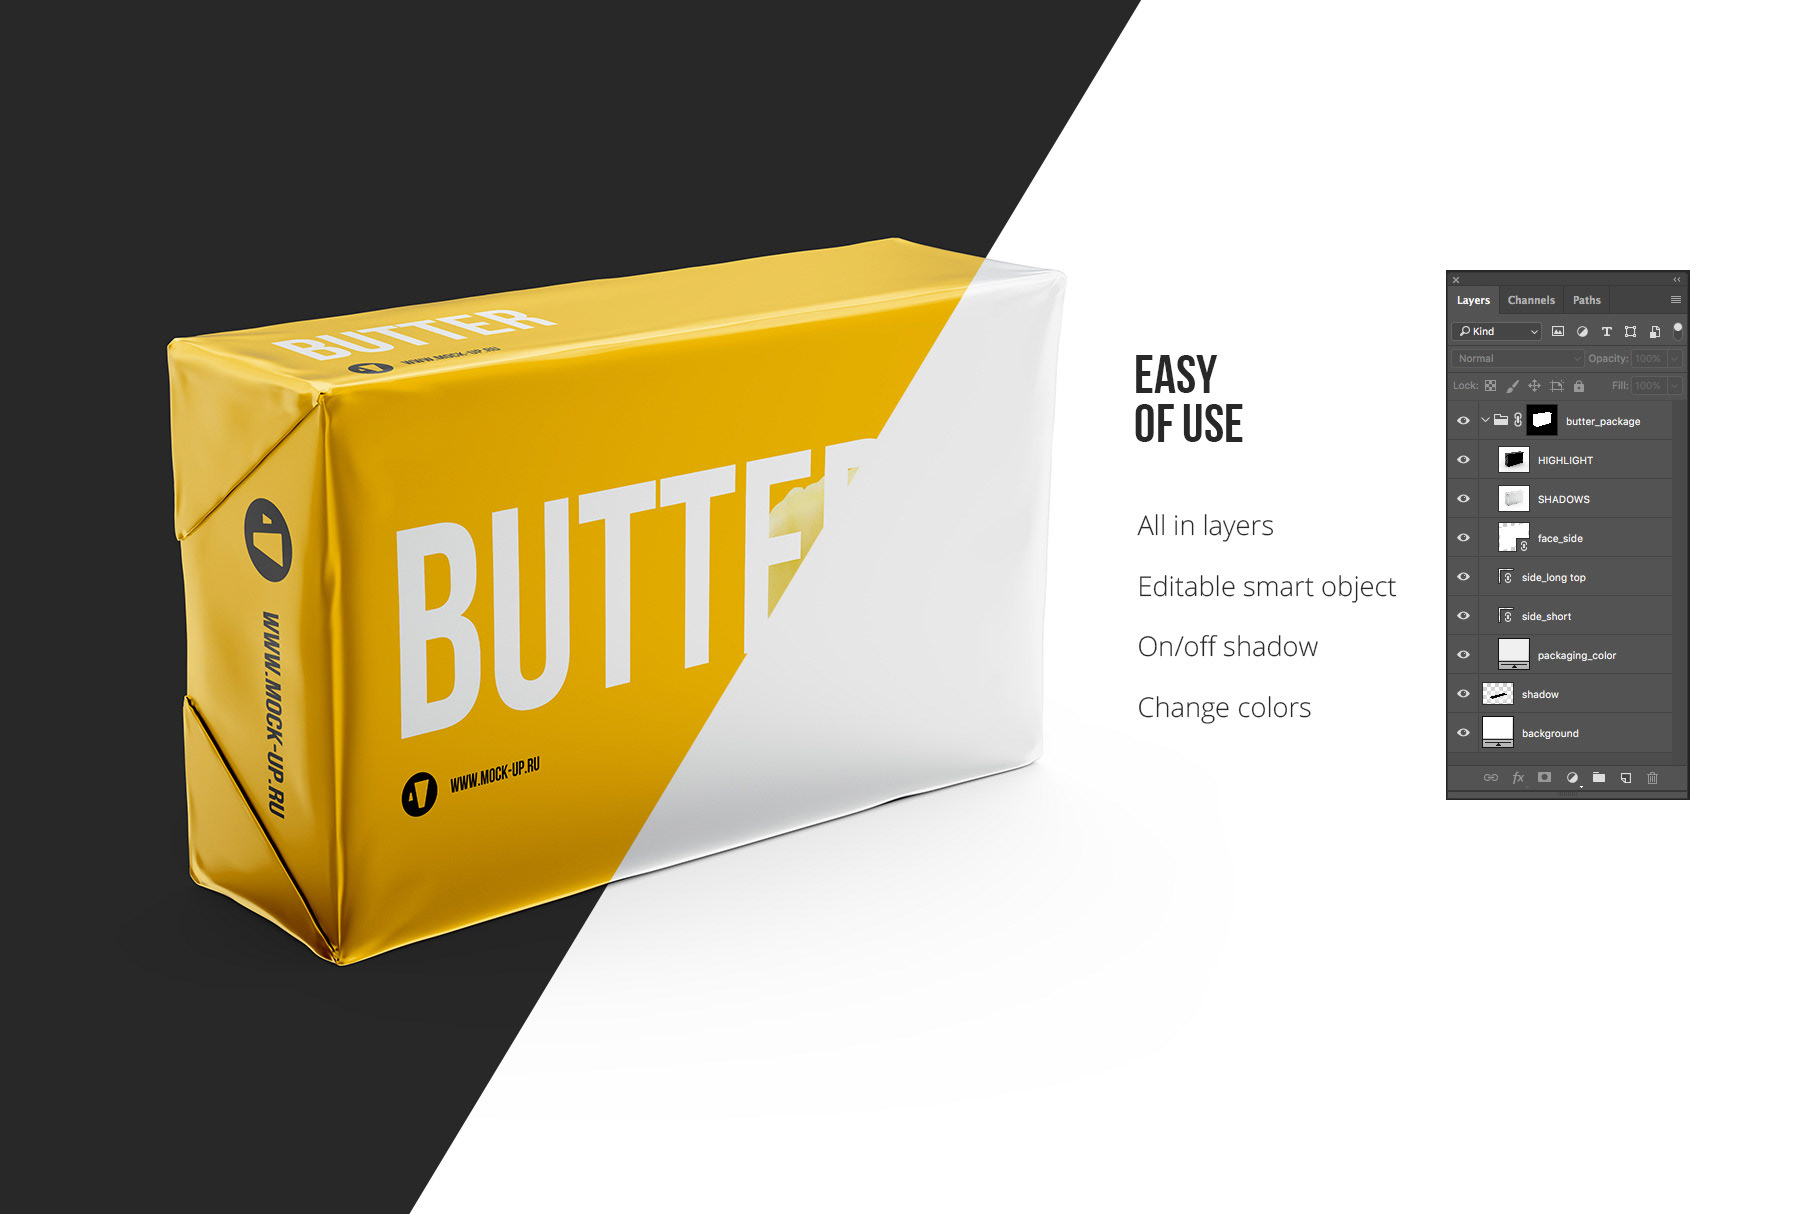 Download Exclusive Product Mockups - Butter block 3/4 view mockup. 200g